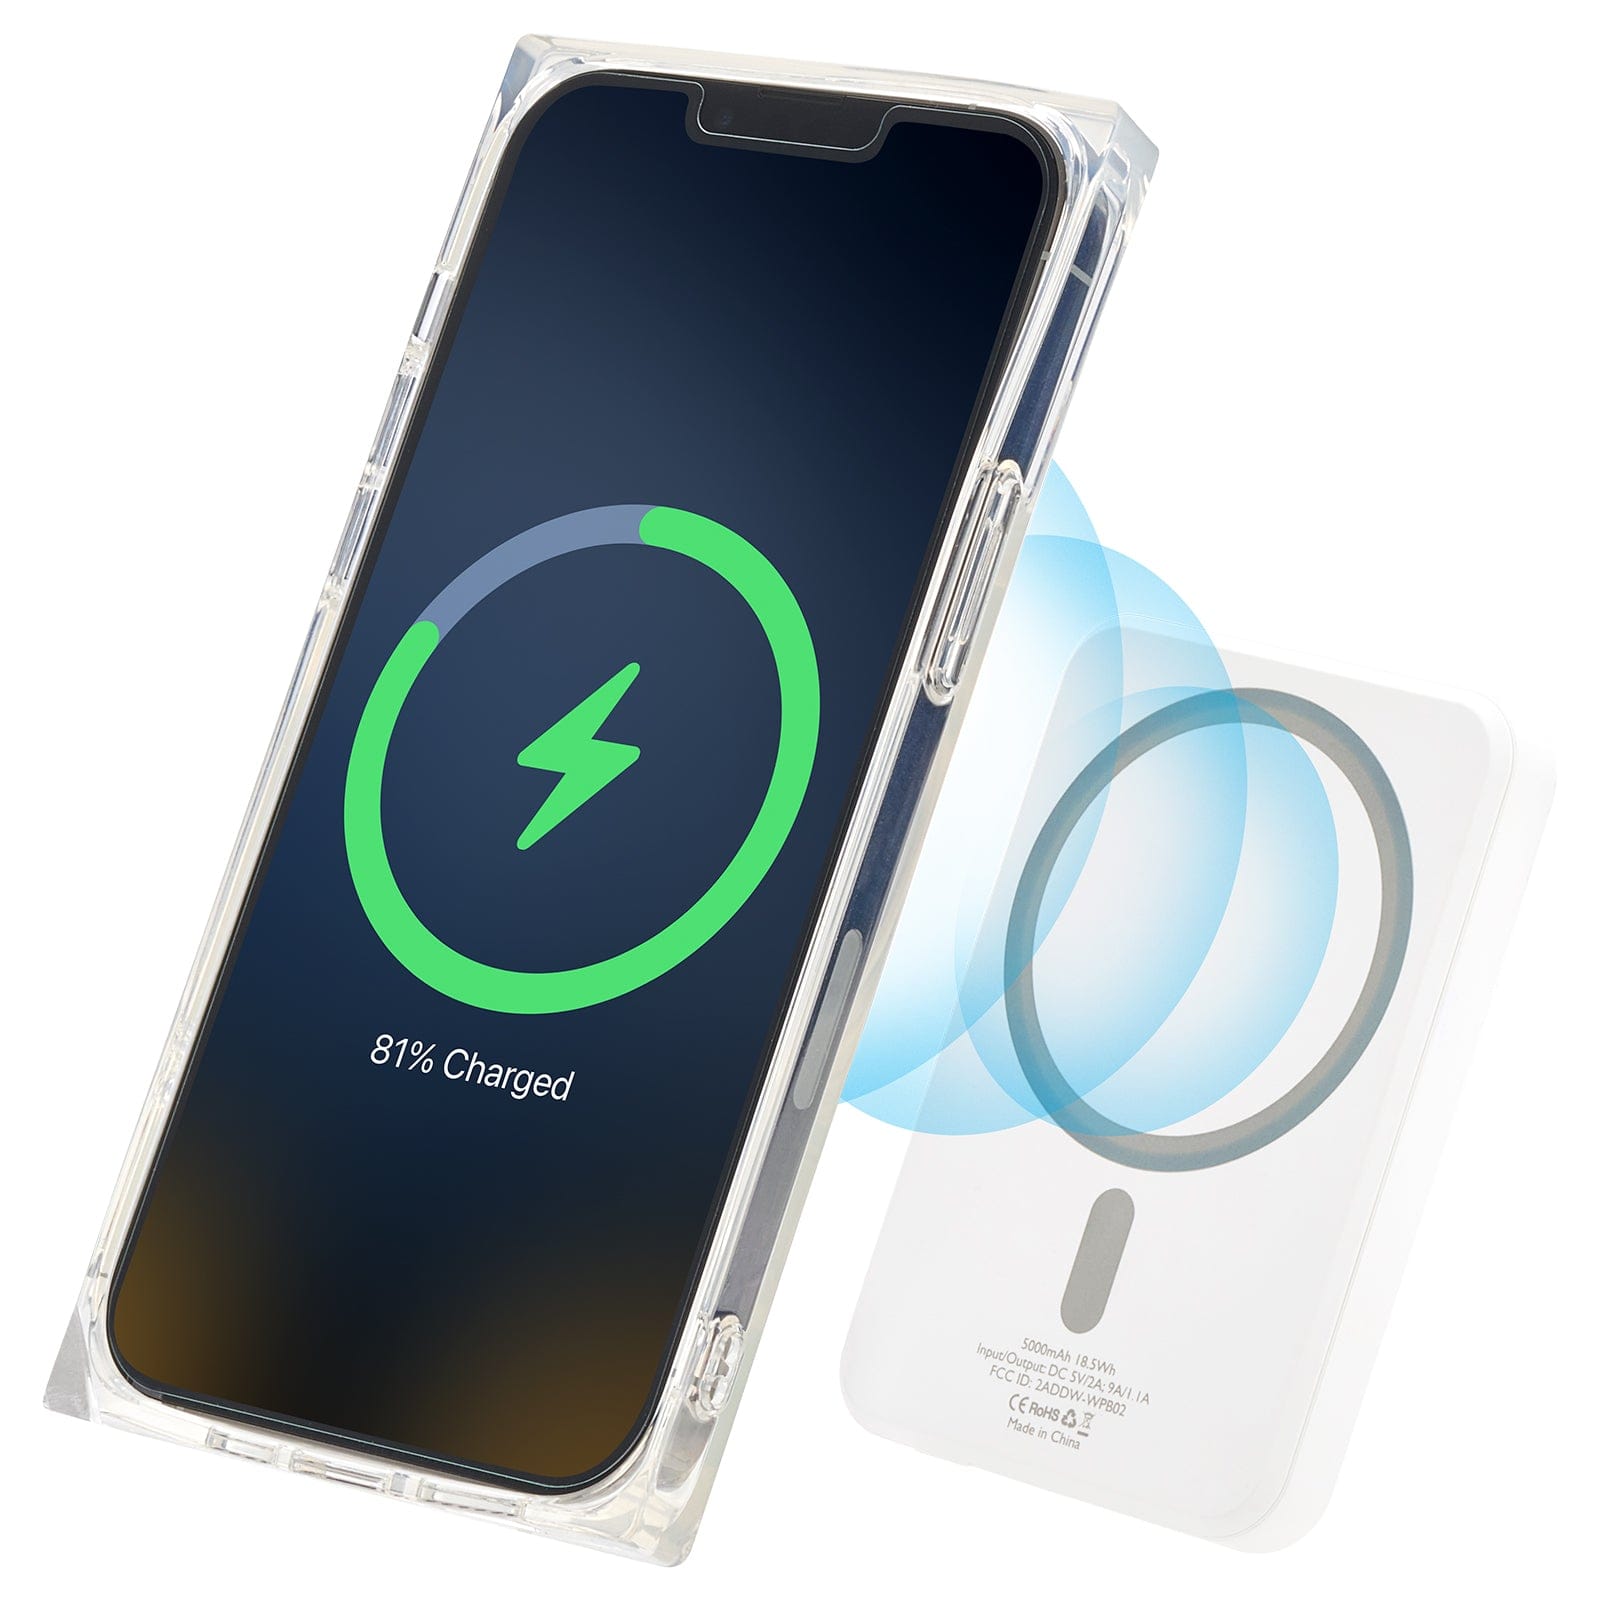 Magnetically attached to your phone while charging it.